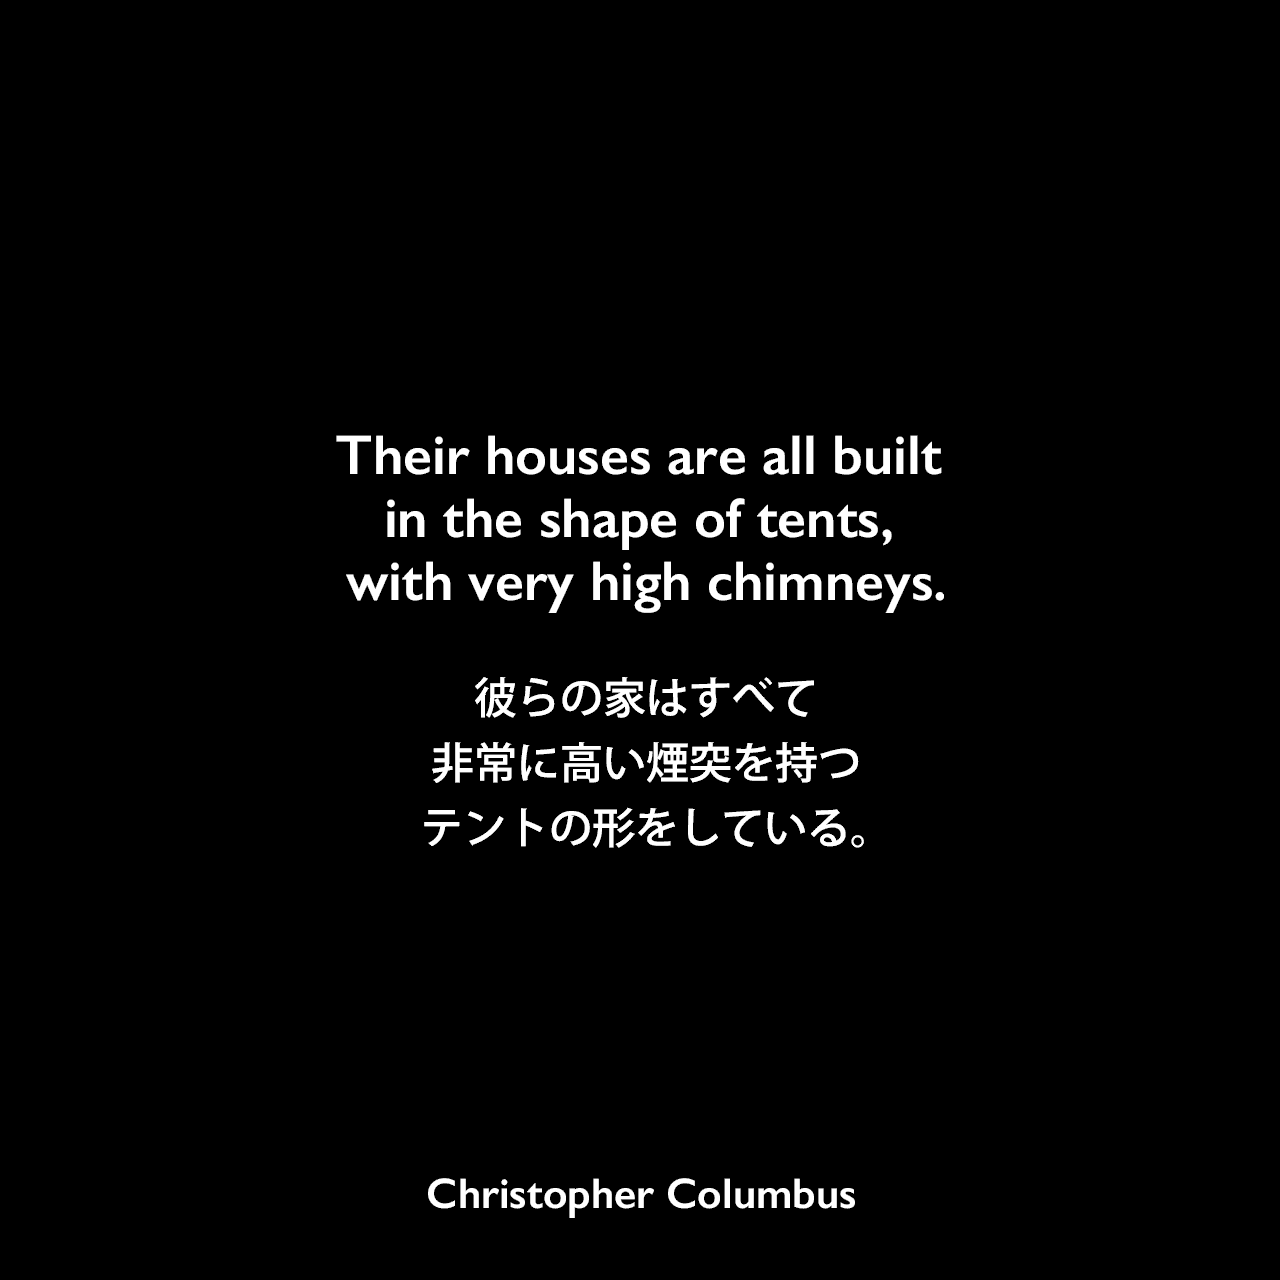 Their houses are all built in the shape of tents, with very high chimneys.彼らの家はすべて非常に高い煙突を持つテントの形をしている。Christopher Columbus